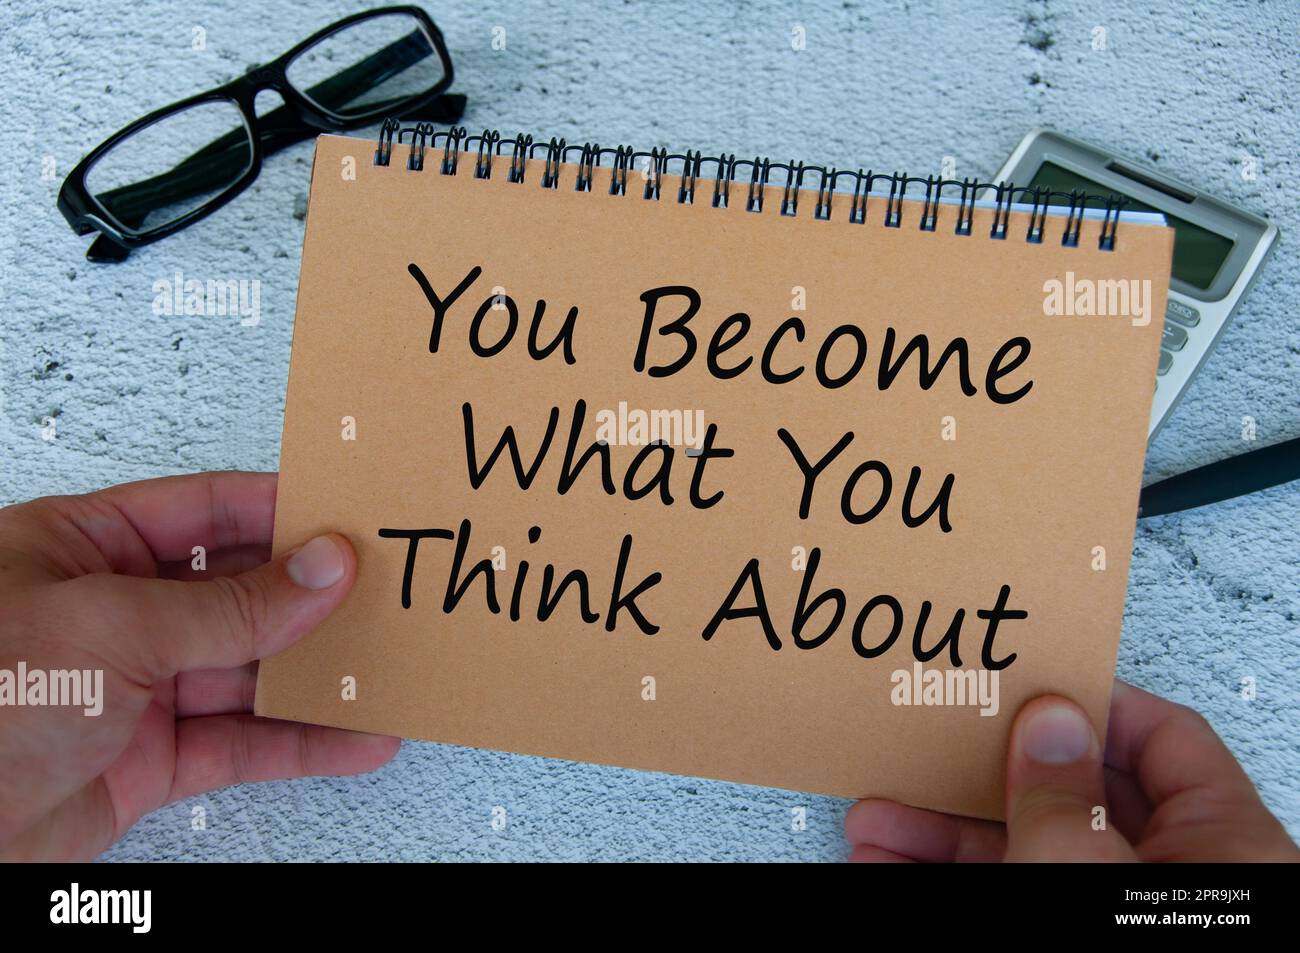 You become what you think about text written on brown notepad. Motivational concept. Stock Photo